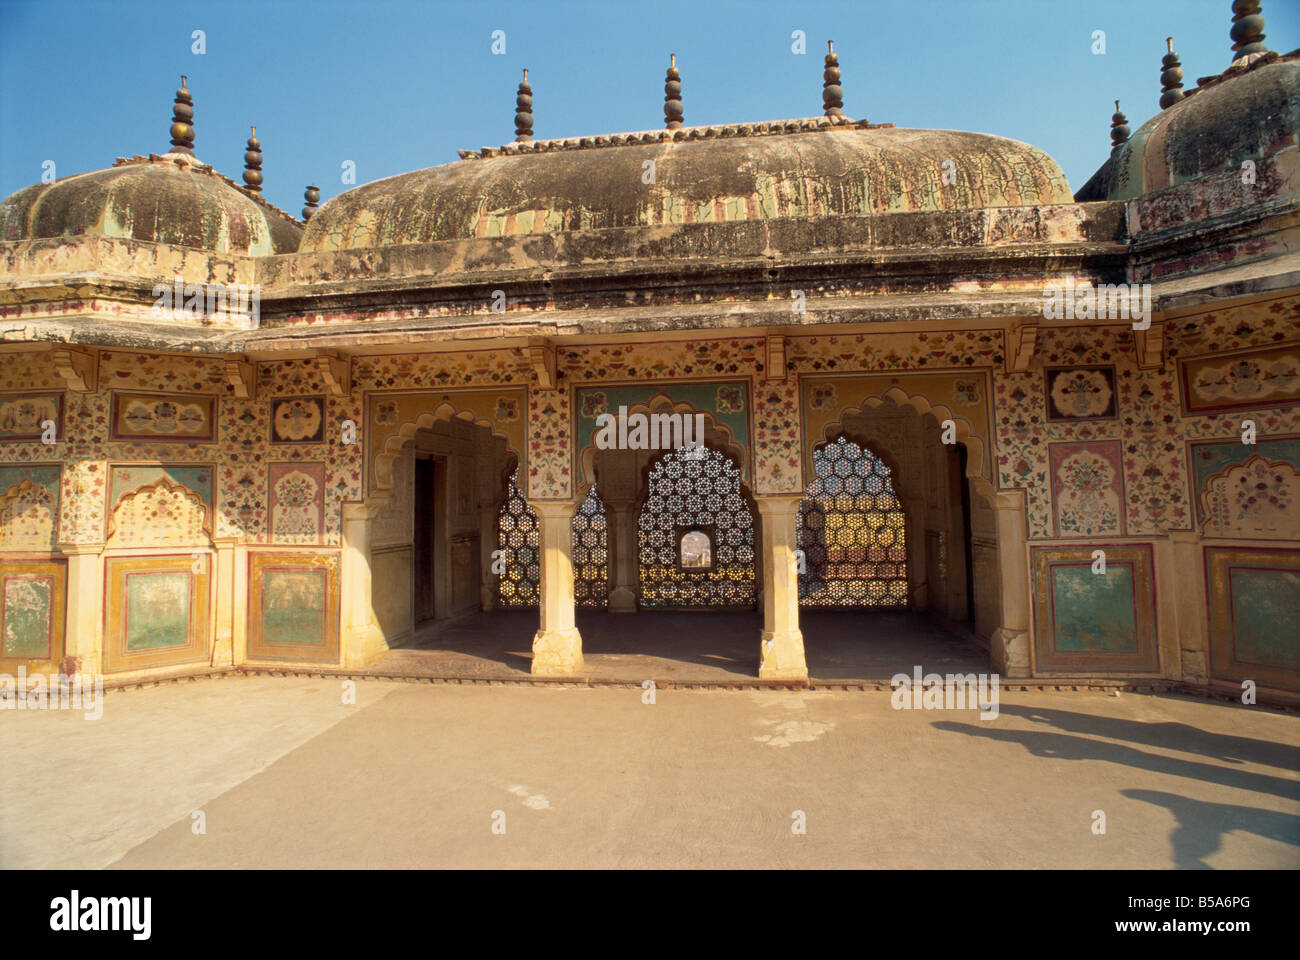 Amber Palace and Fort built in 1592 by Maharajah Man Singh Jaipur Rajasthan state India Asia Stock Photo